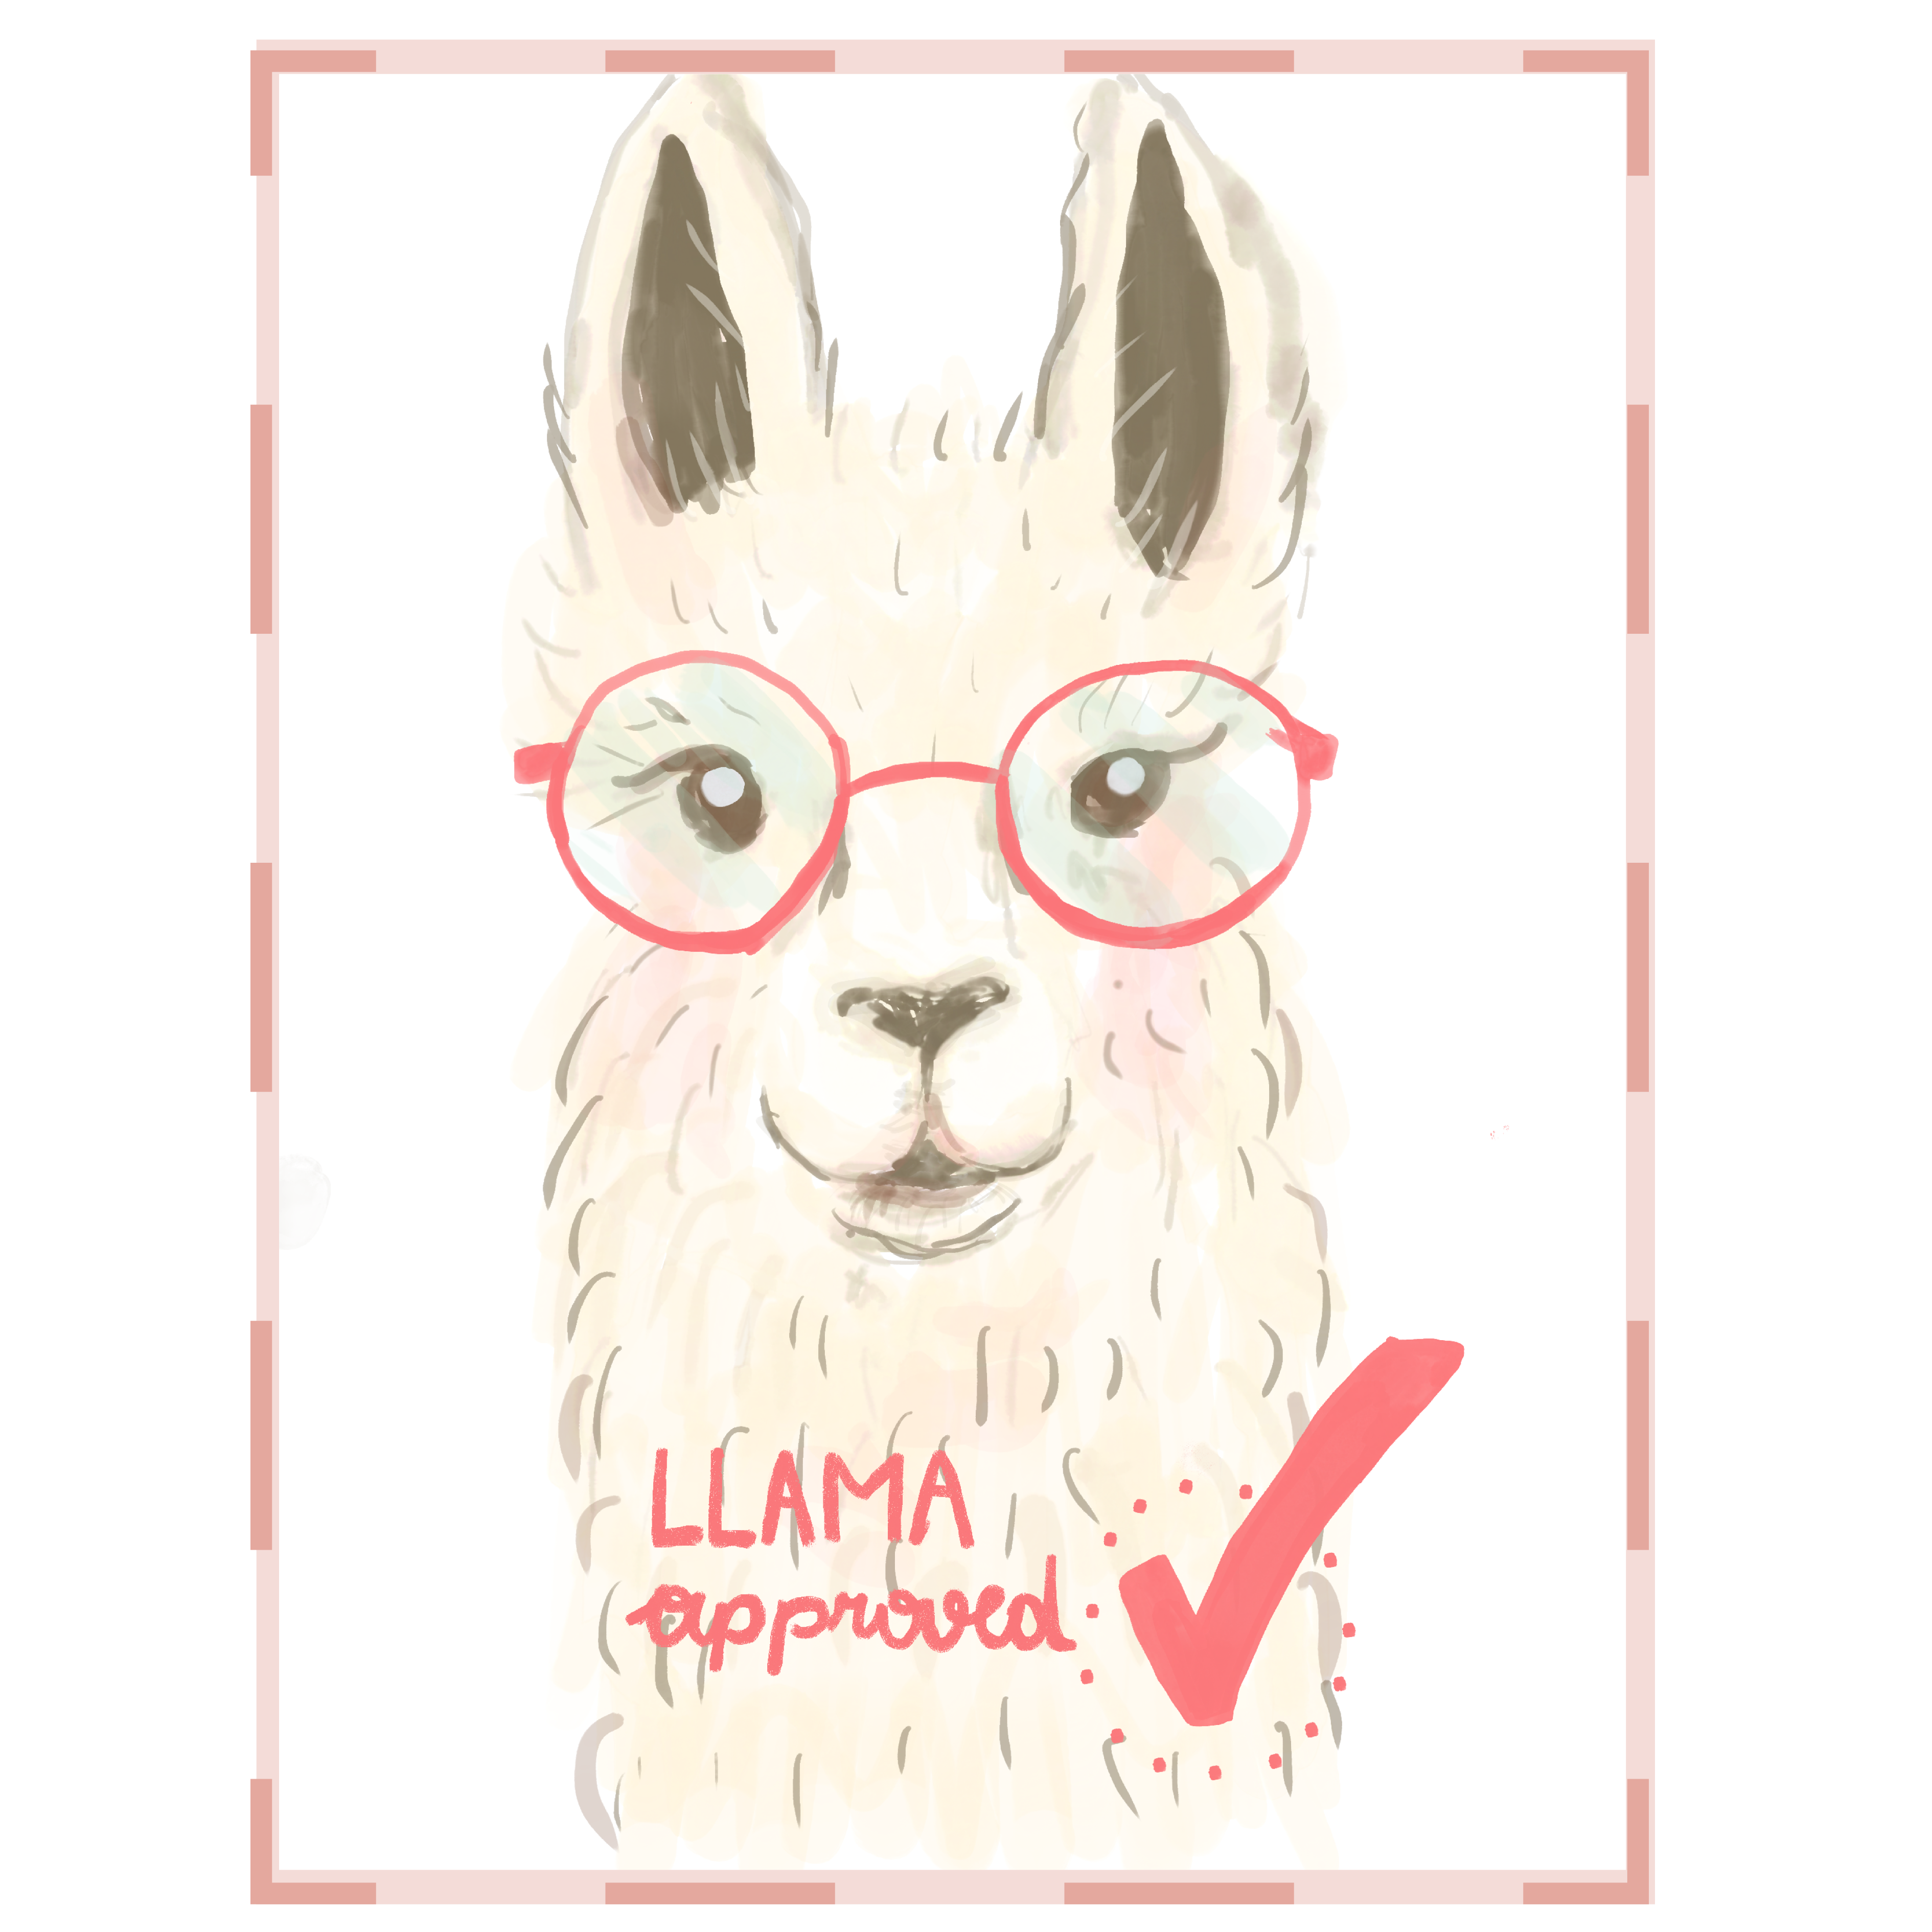 Sticker to the article: Drawing of a llama with the label "LLAMA approved"